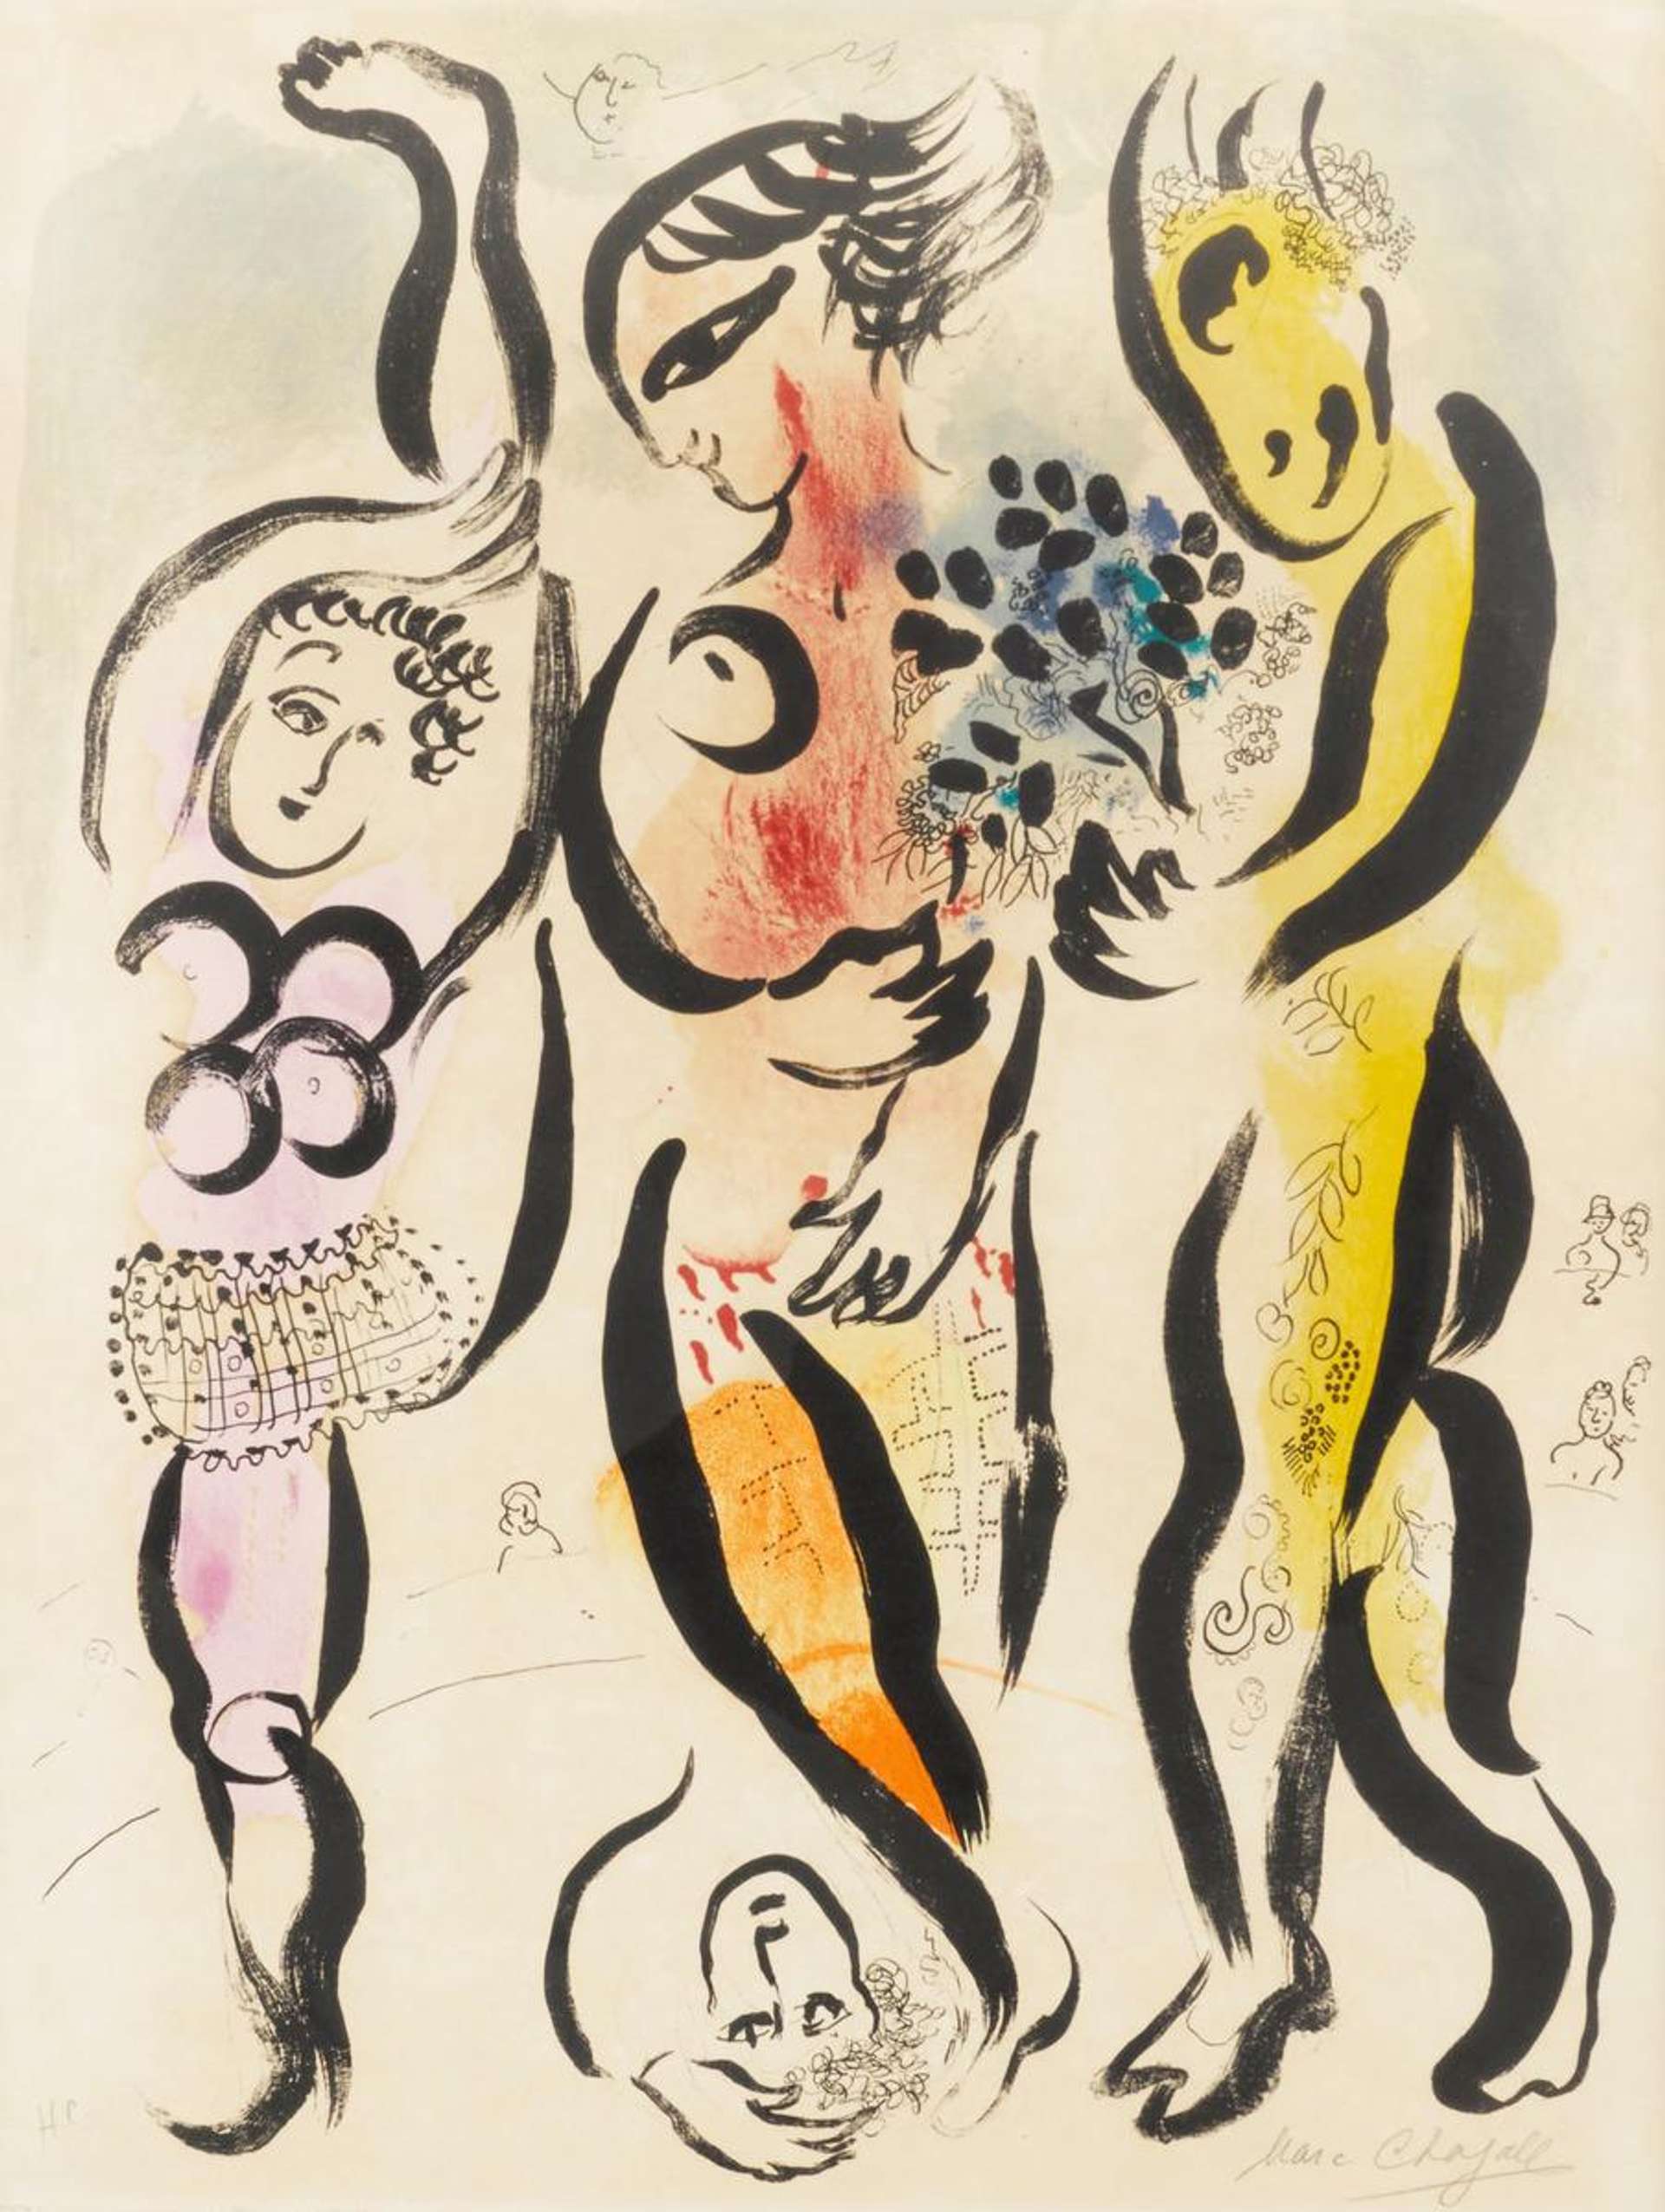 Les Trois Acrobates - Signed Print by Marc Chagall 1956 - MyArtBroker